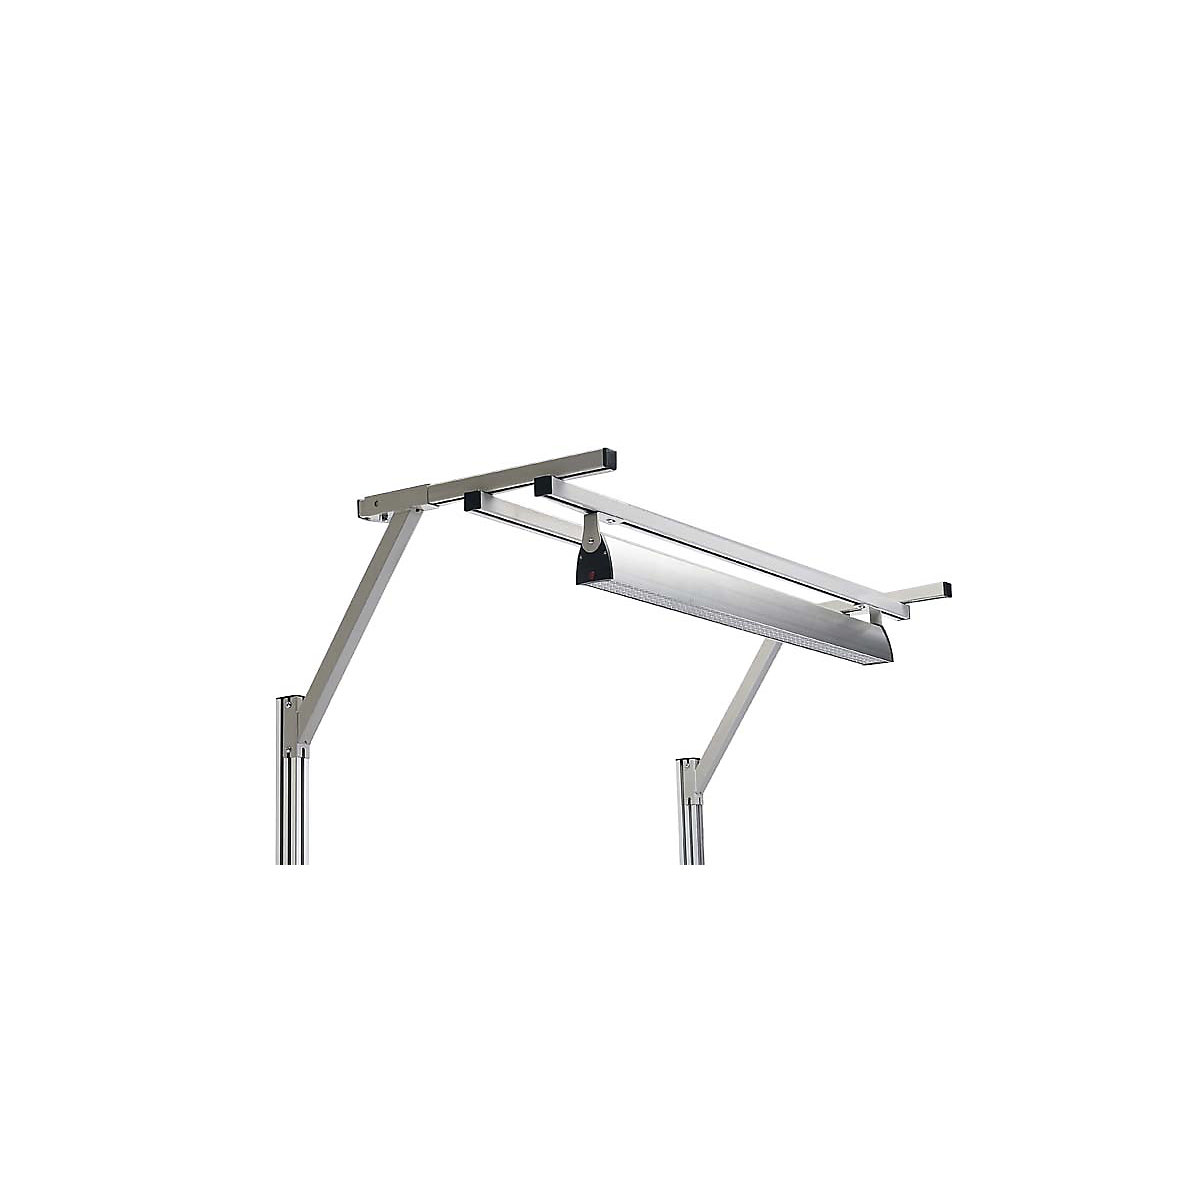 Support frame for work table – Treston